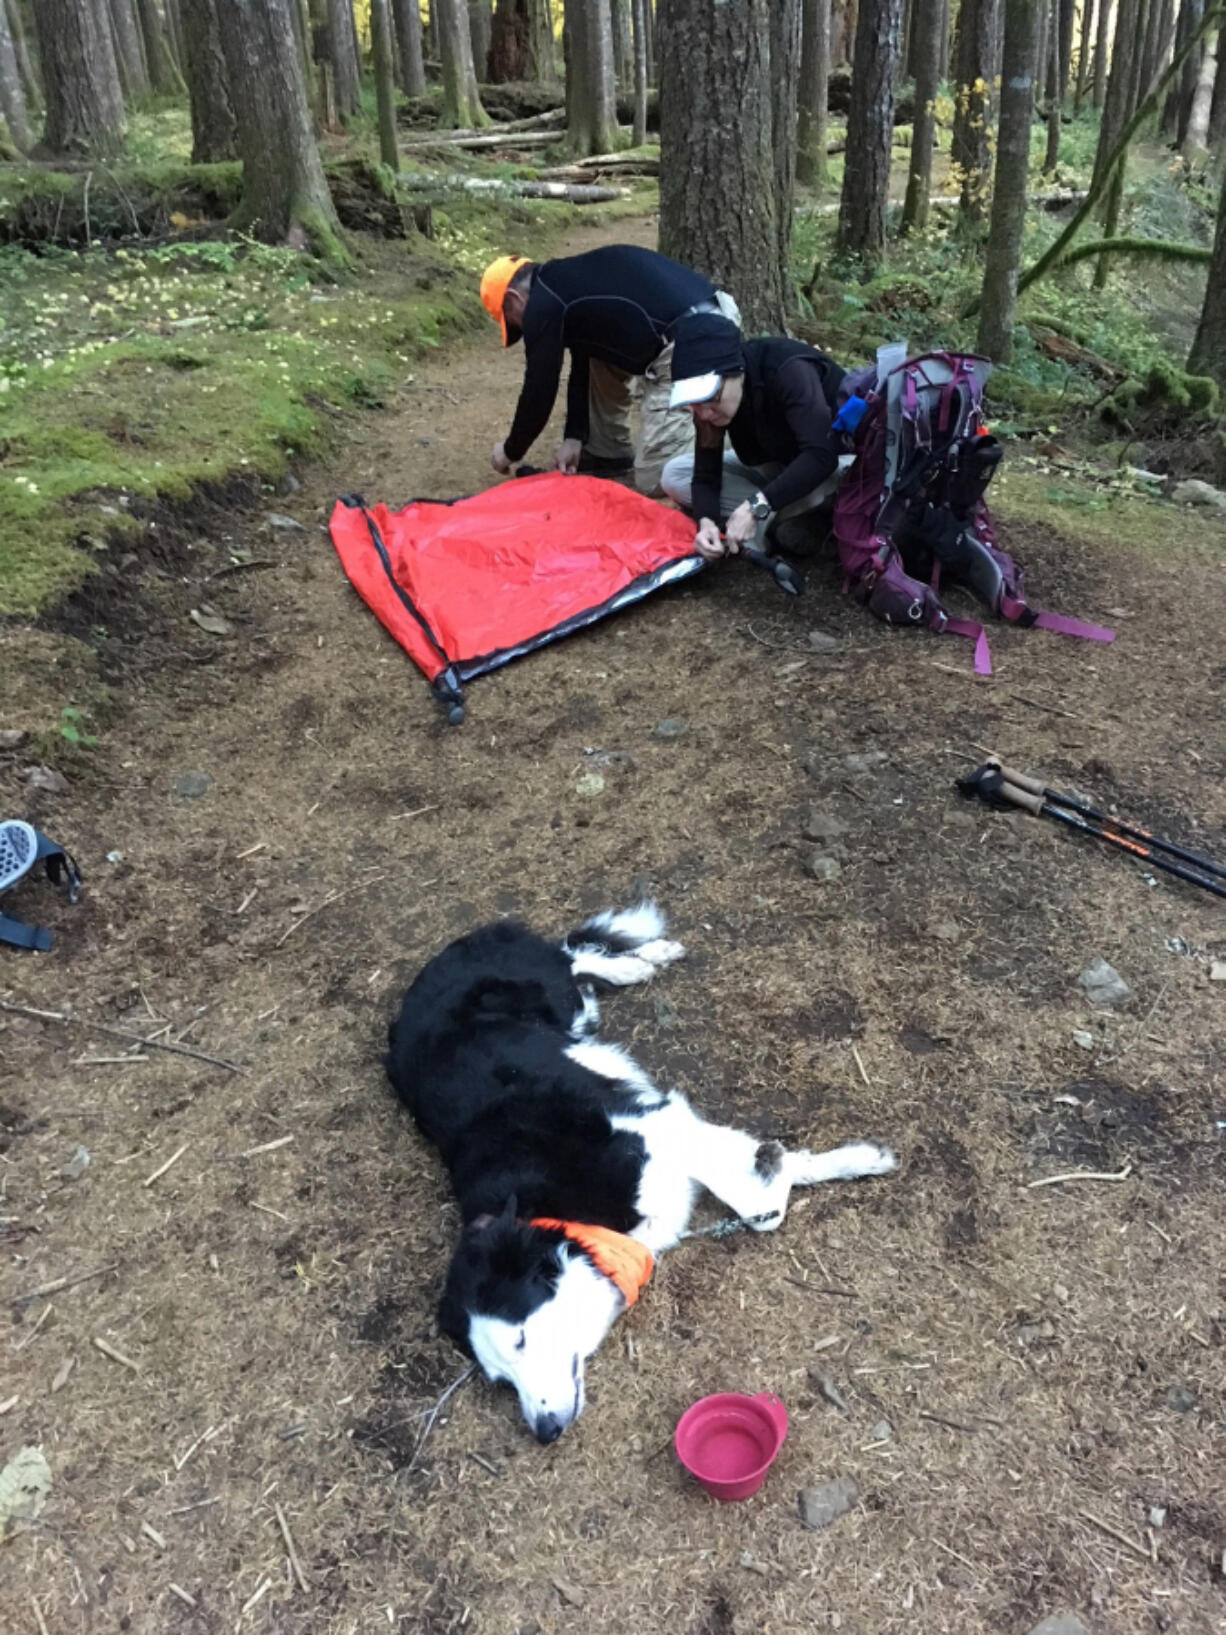 Laura Stockton and Rick Blevins helped Andy Healy create a litter to evacuate her 35-pound border collie, Fen, after she lost the ability to use her legs while hiking Oct. 29. Fen became unresponsive after eating a discarded marijuana edible in a vacant campsite.